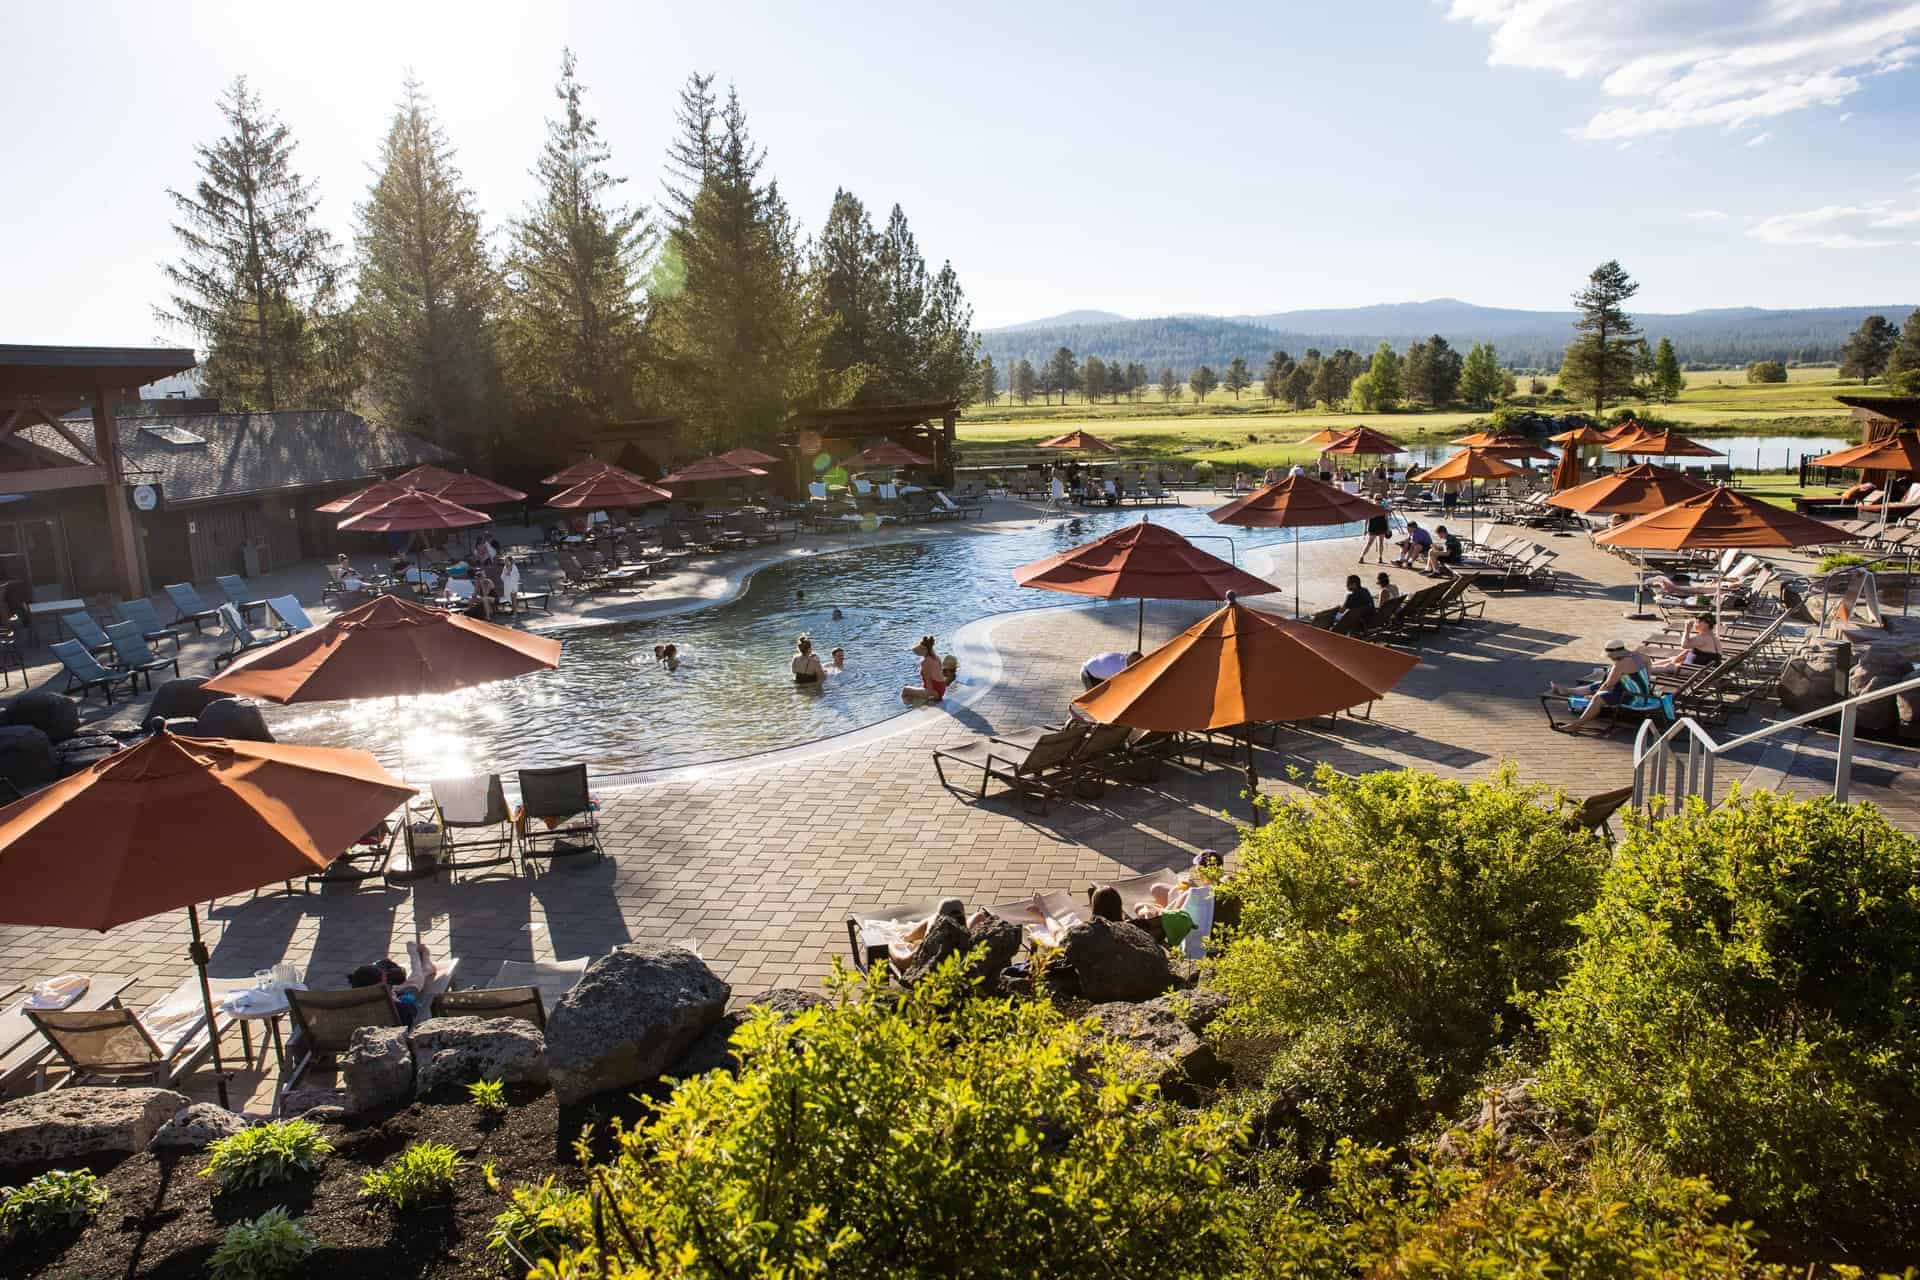 Six Car-Free Adventures You Can Have at Sunriver Resort This Summer